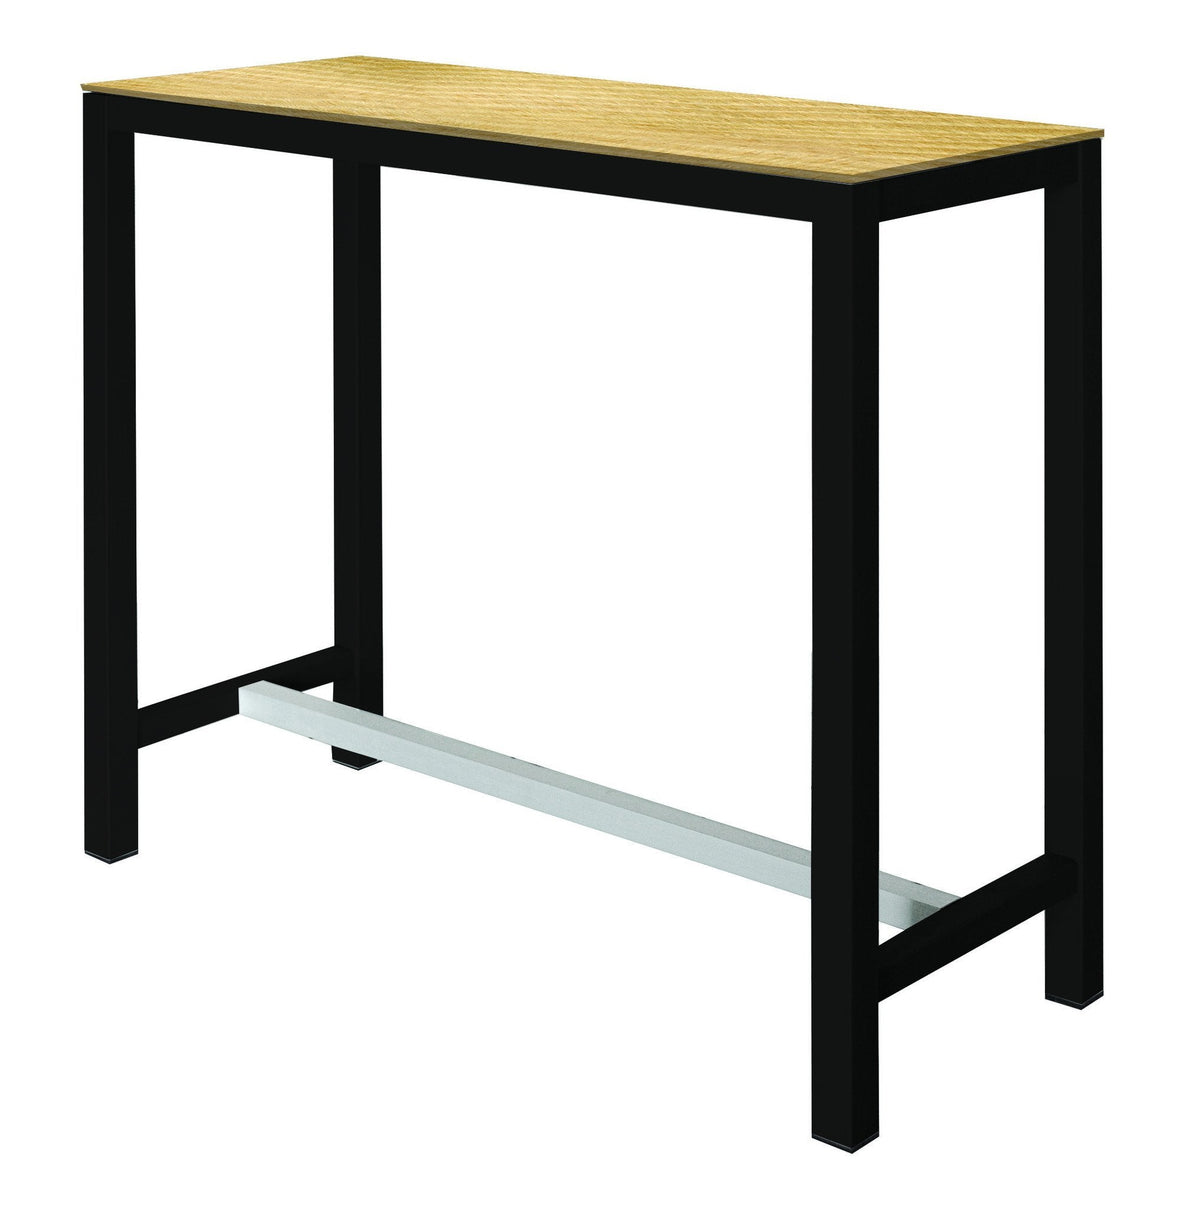 Banket Poseur Table-Gaber-Contract Furniture Store